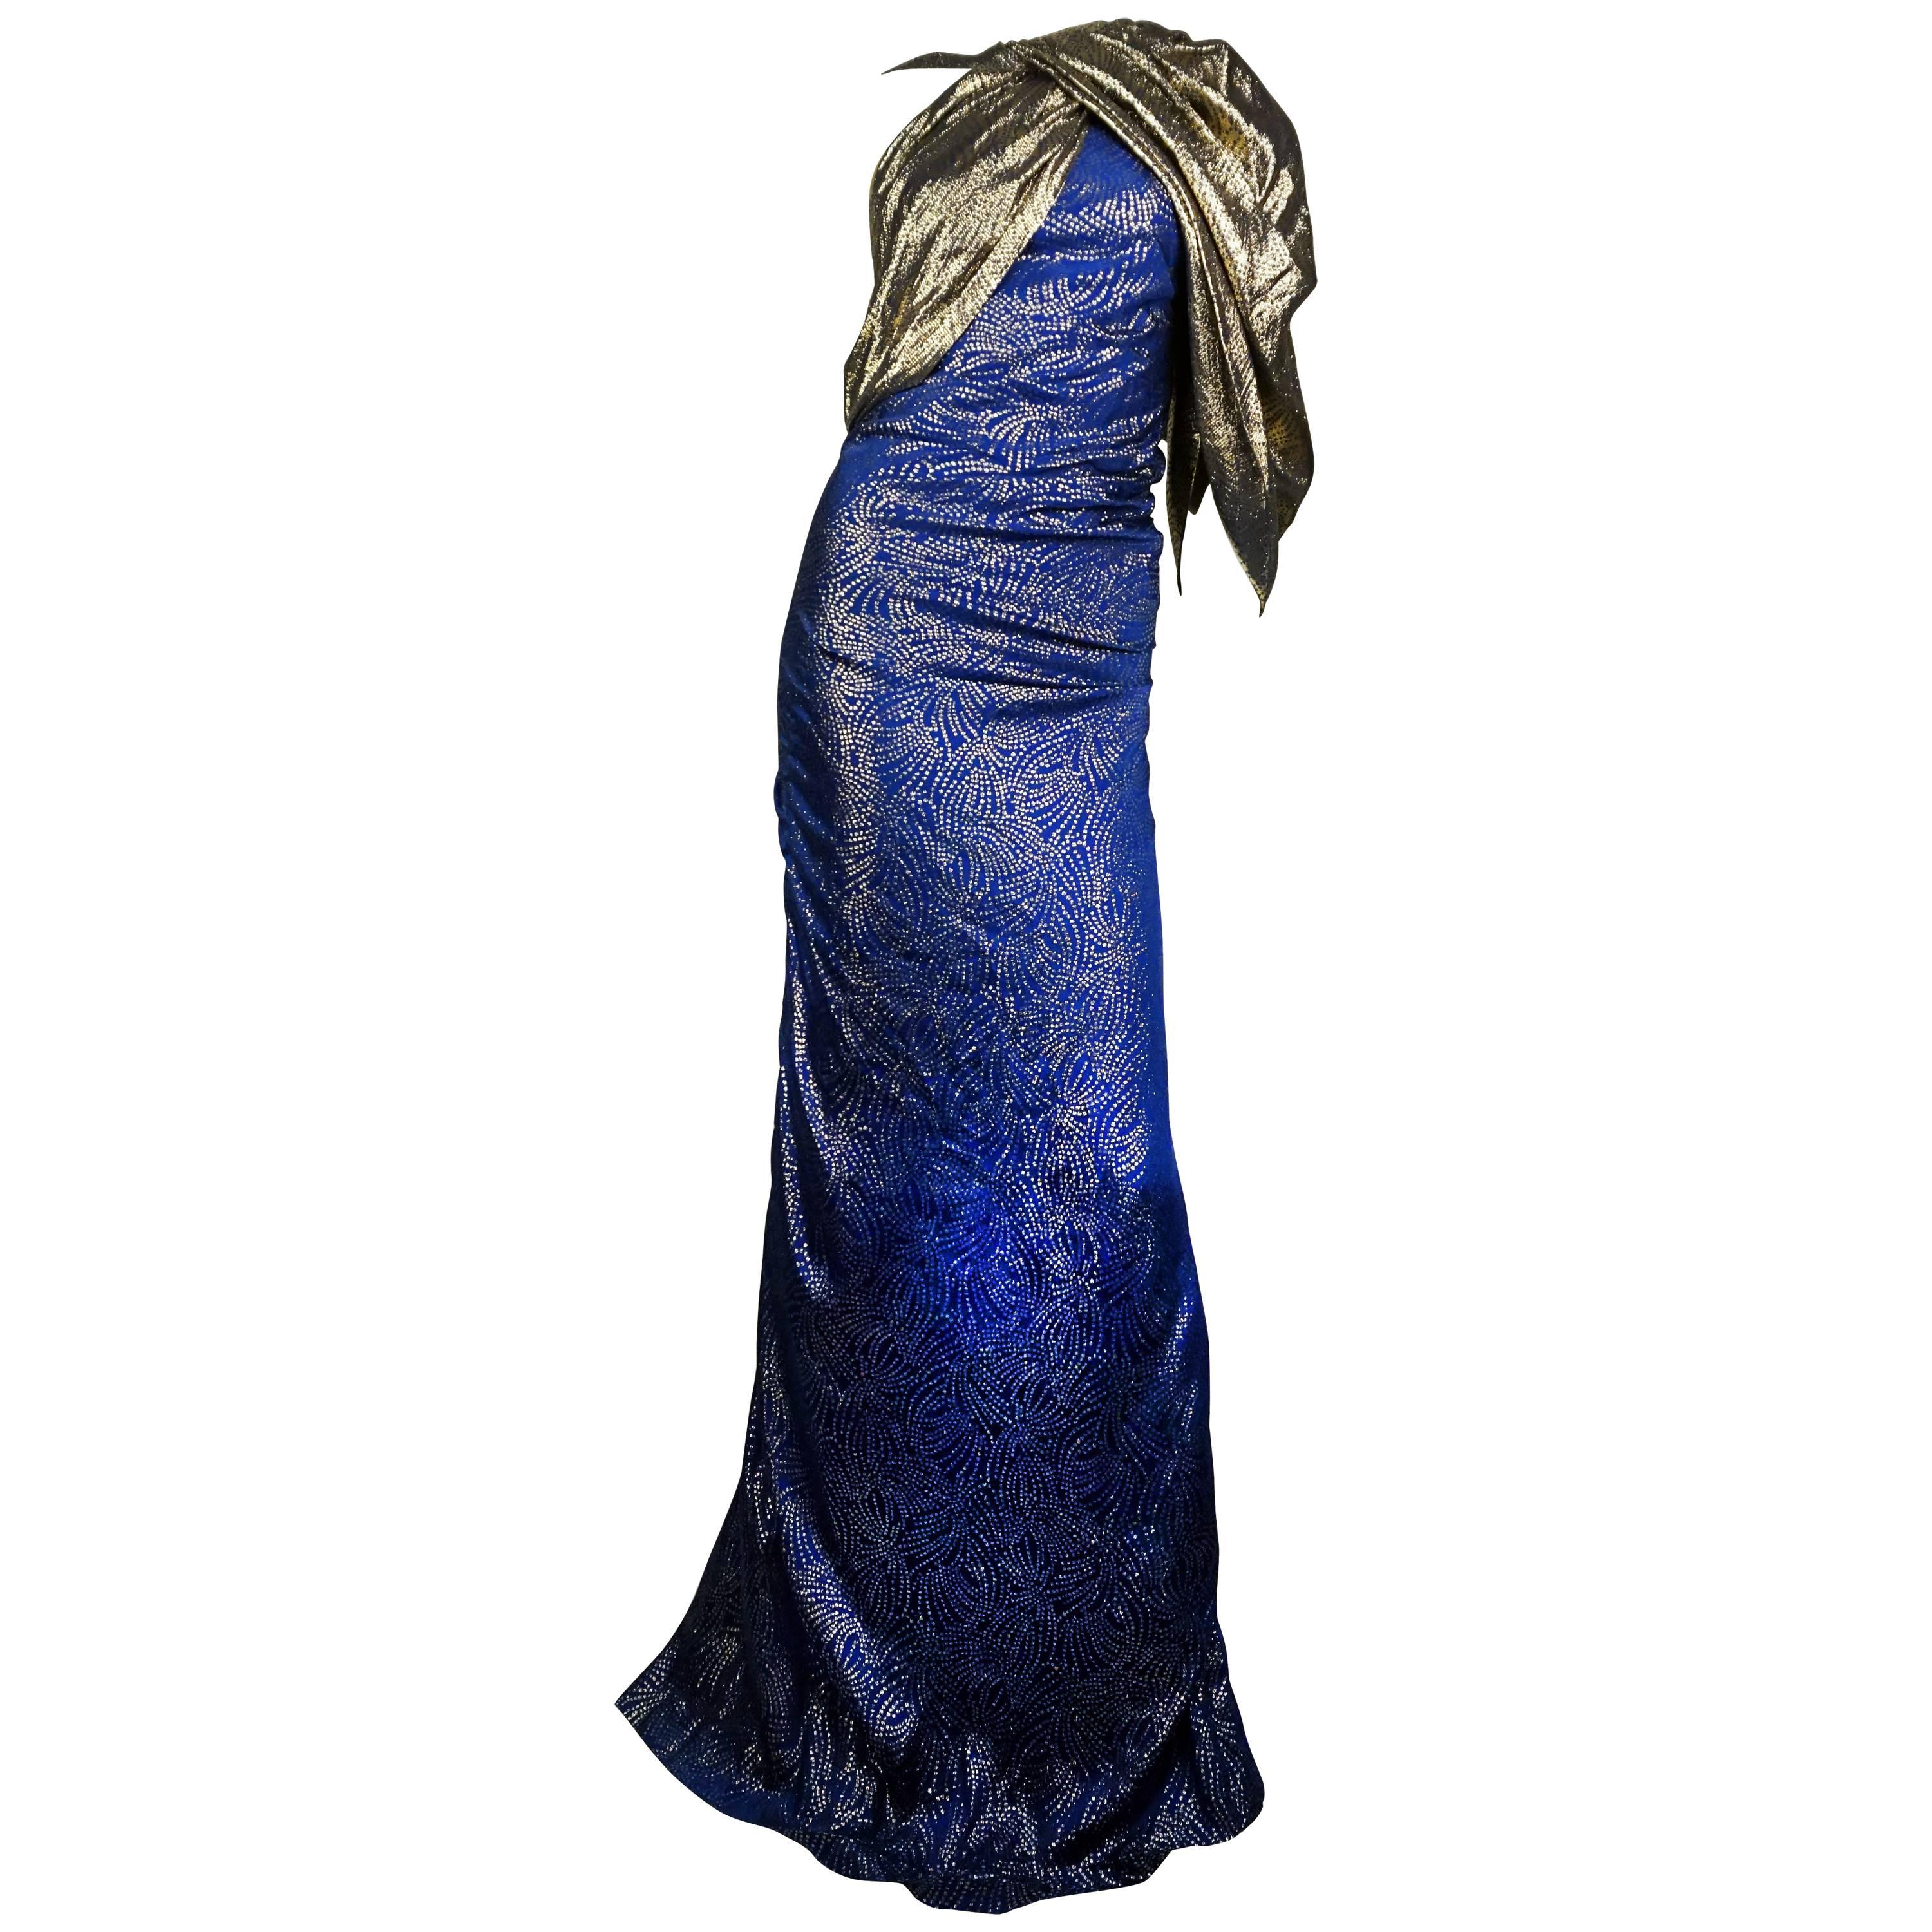 1980s Lame Jacqueline De Ribes One Shoulder Mermaid Gown

This fabulous Cerulian and Gold brocade lame gown displays a dramatic one should attatched to a beautifully designed halter that displays subtle rouche elements along the bodice. 

There